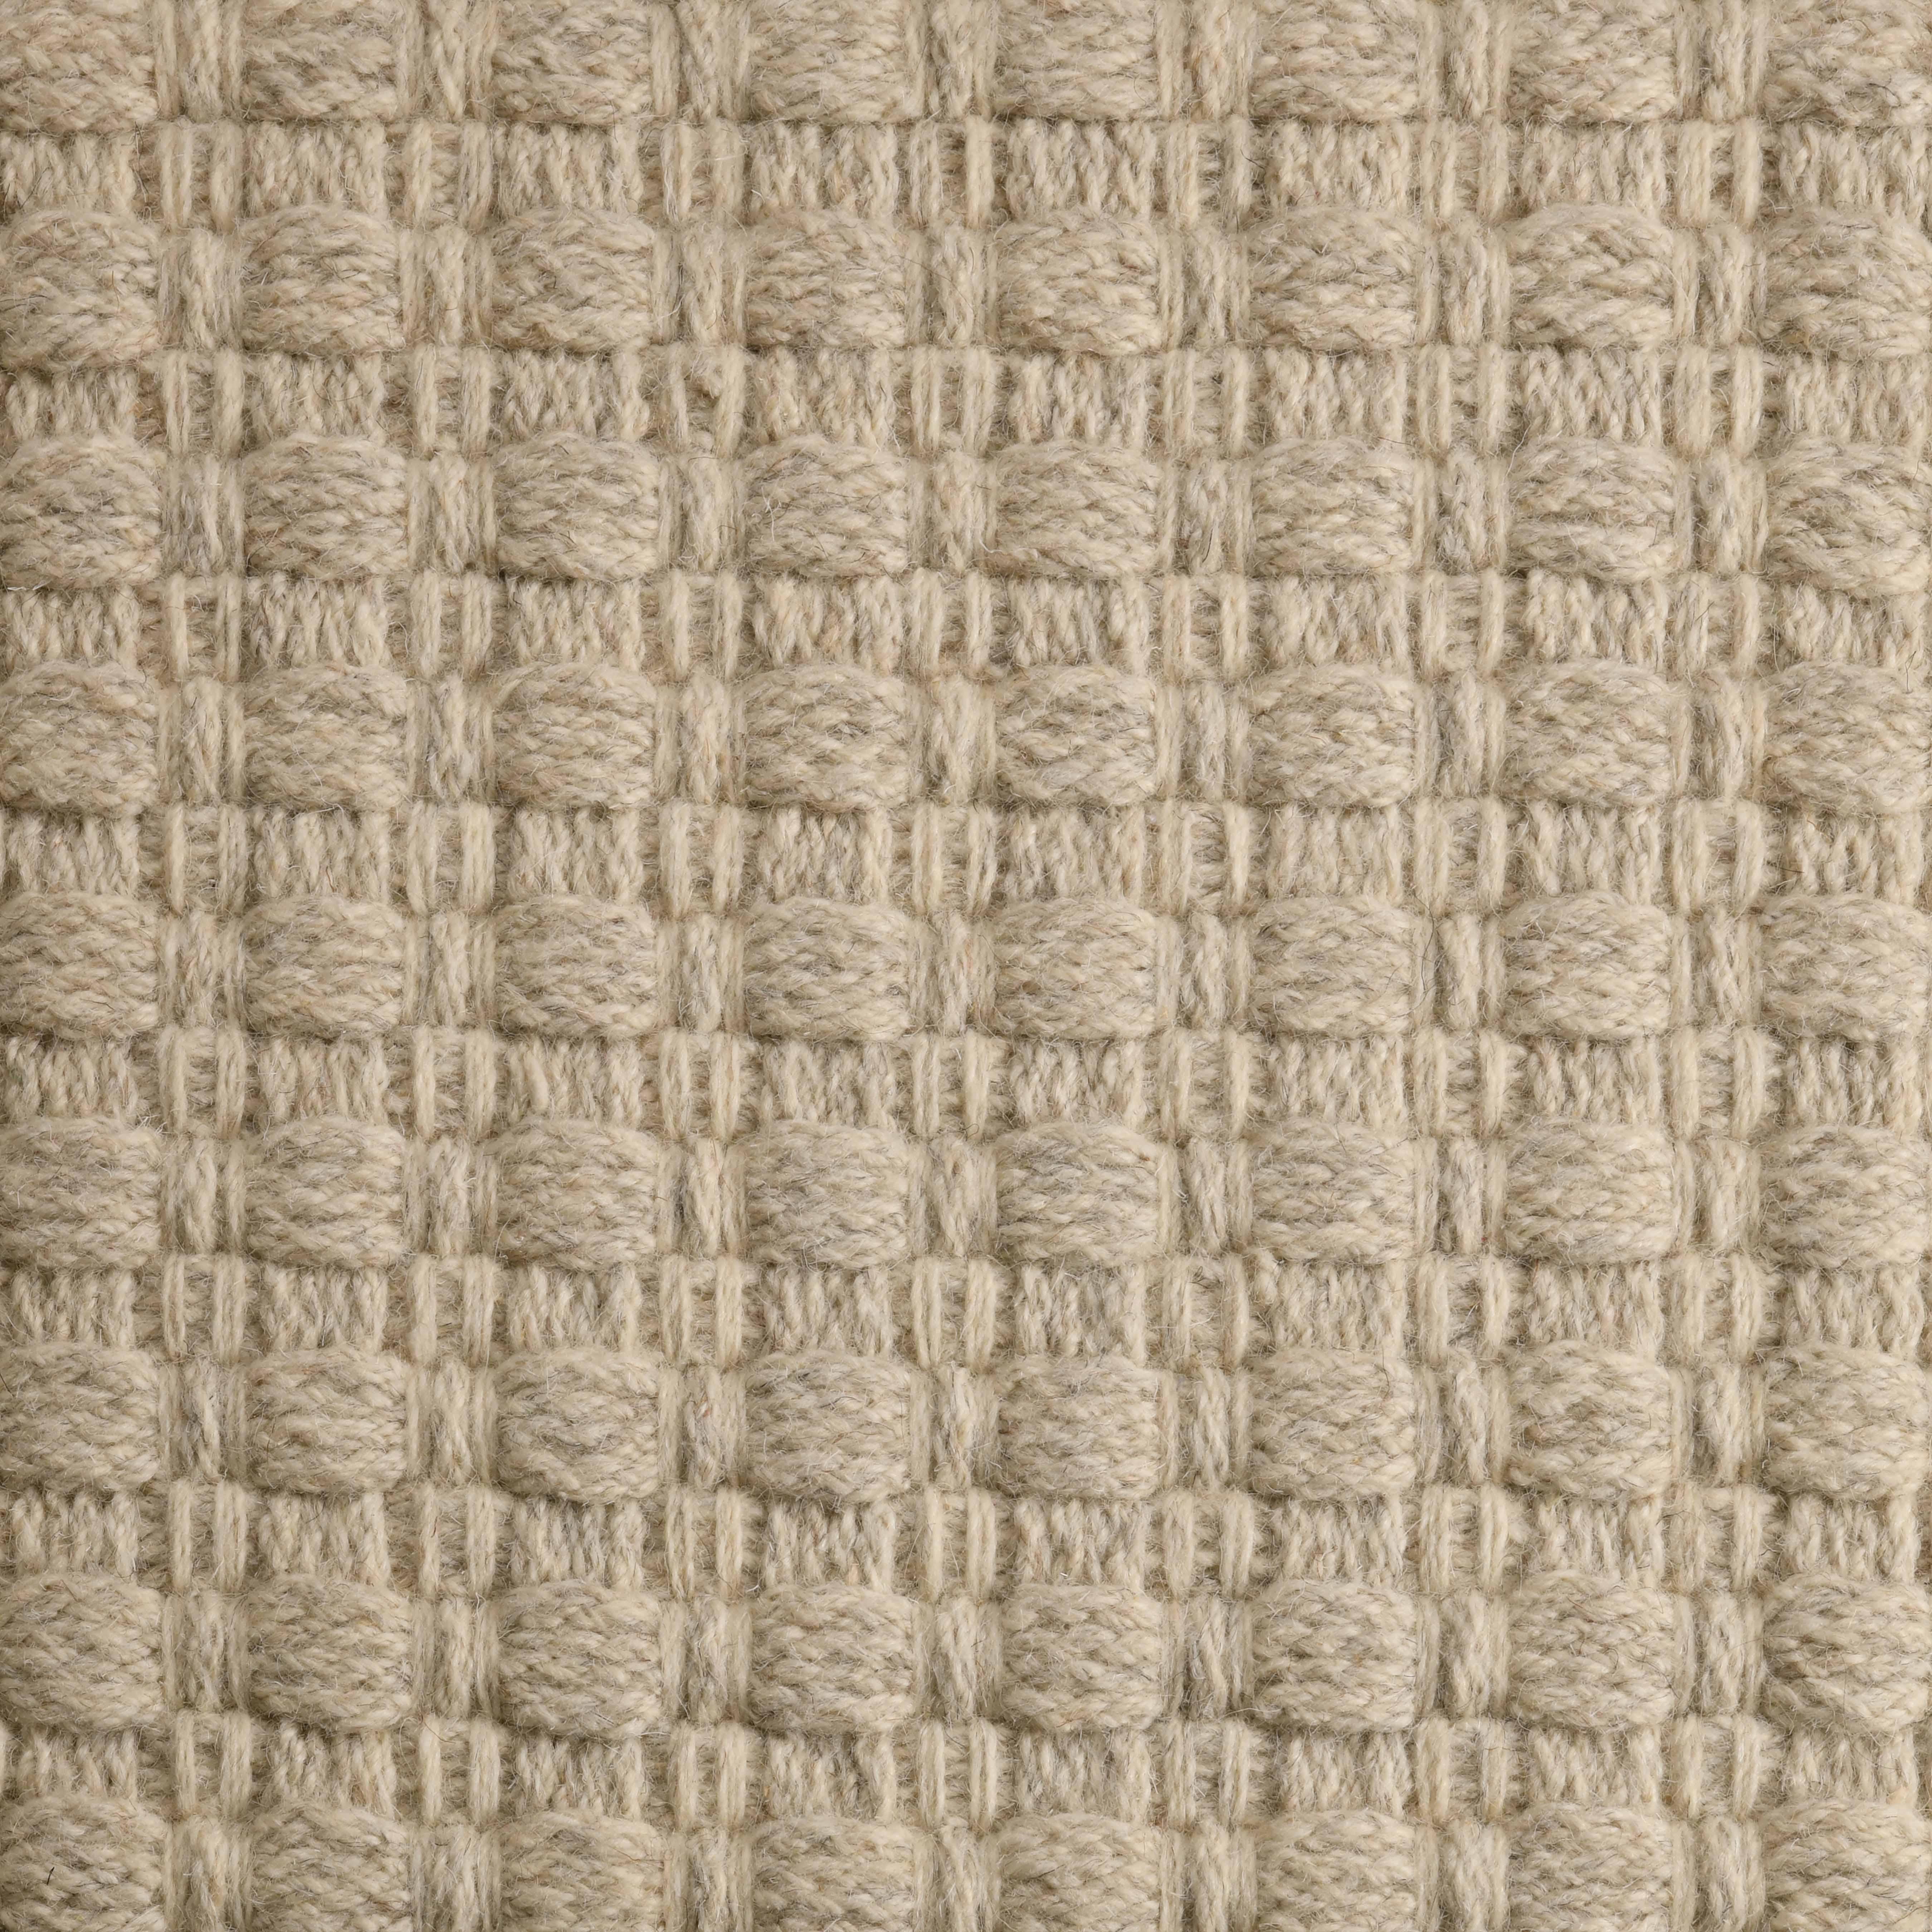 Contemporary Una, Ash, Handwoven Face 60% Undyed NZ Wool, 40% Undyed MED Wool, 8' x 10' For Sale